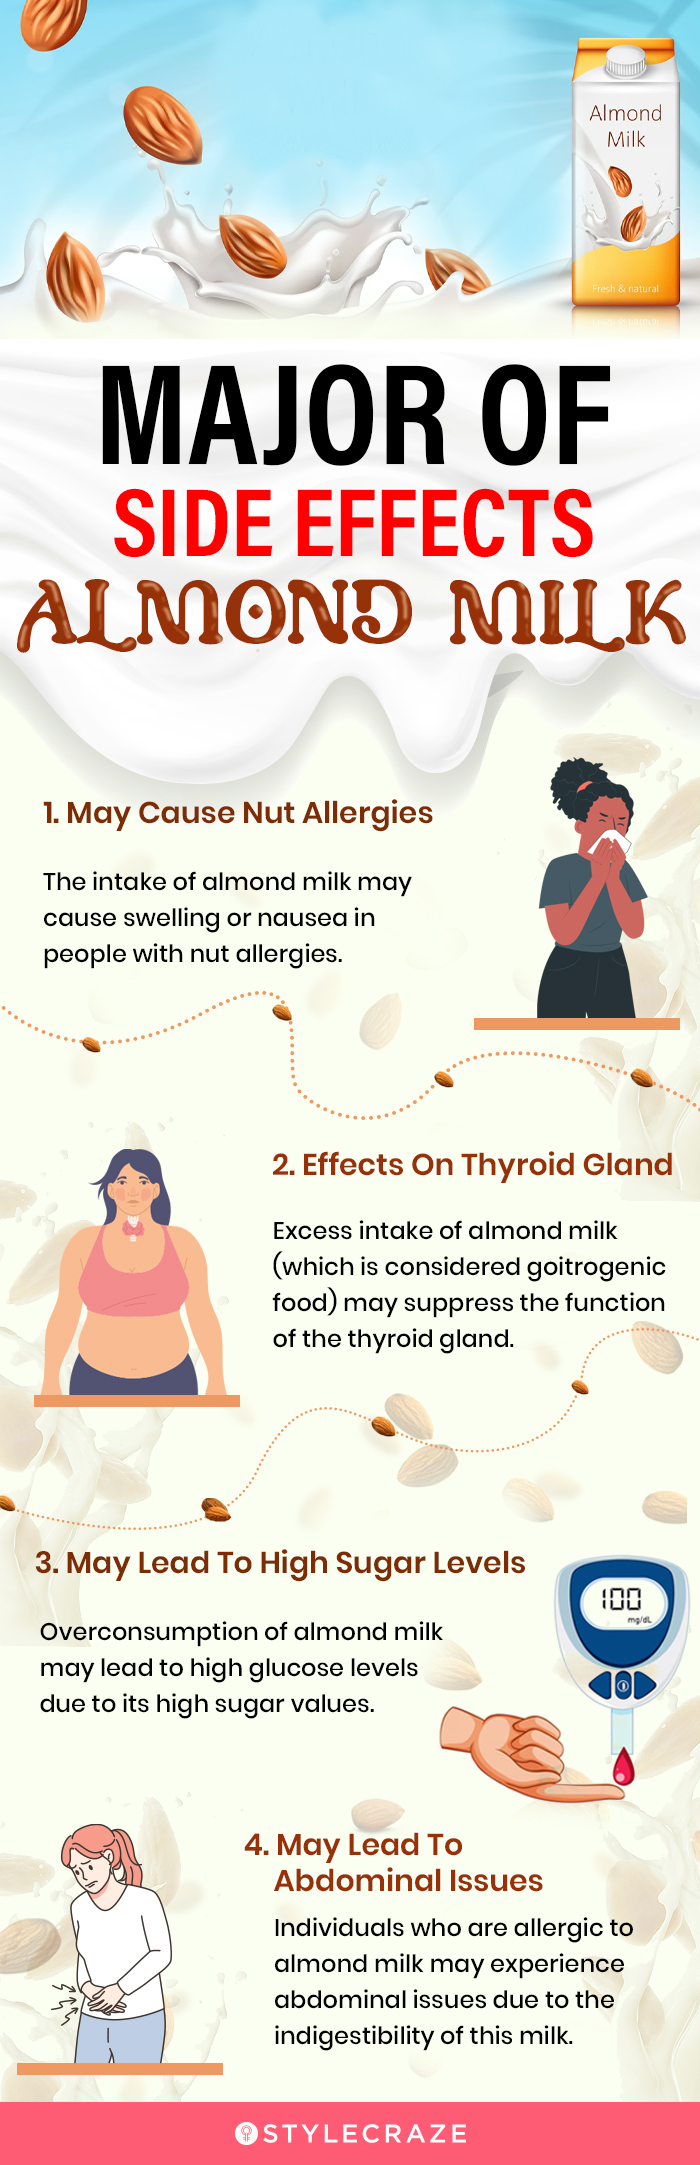 major side effects of almond milk [infographic]